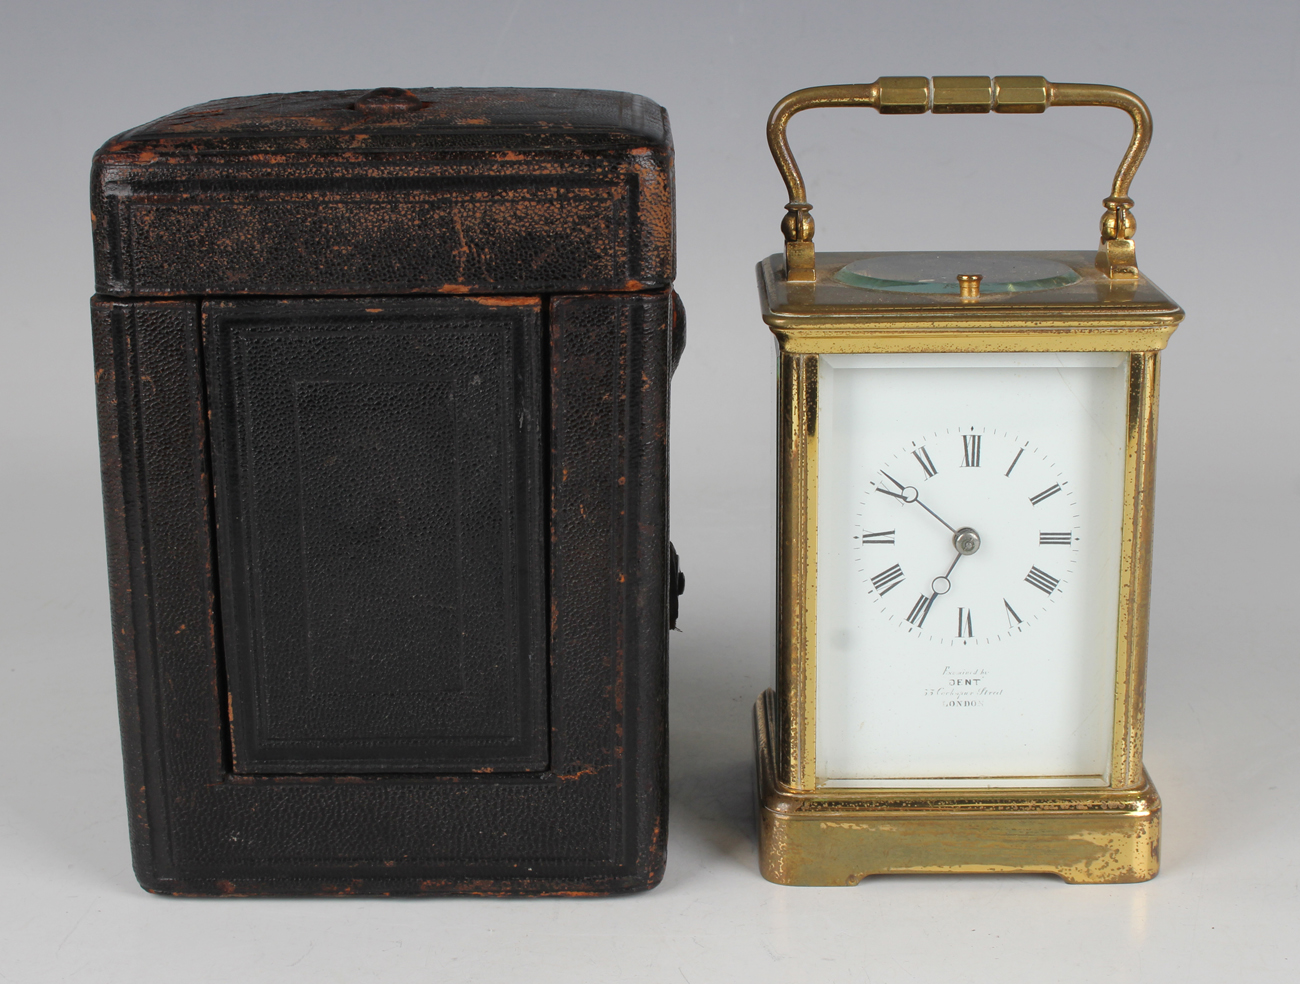 An early 20th century French lacquered brass cased carriage clock with eight day movement striking - Image 2 of 8